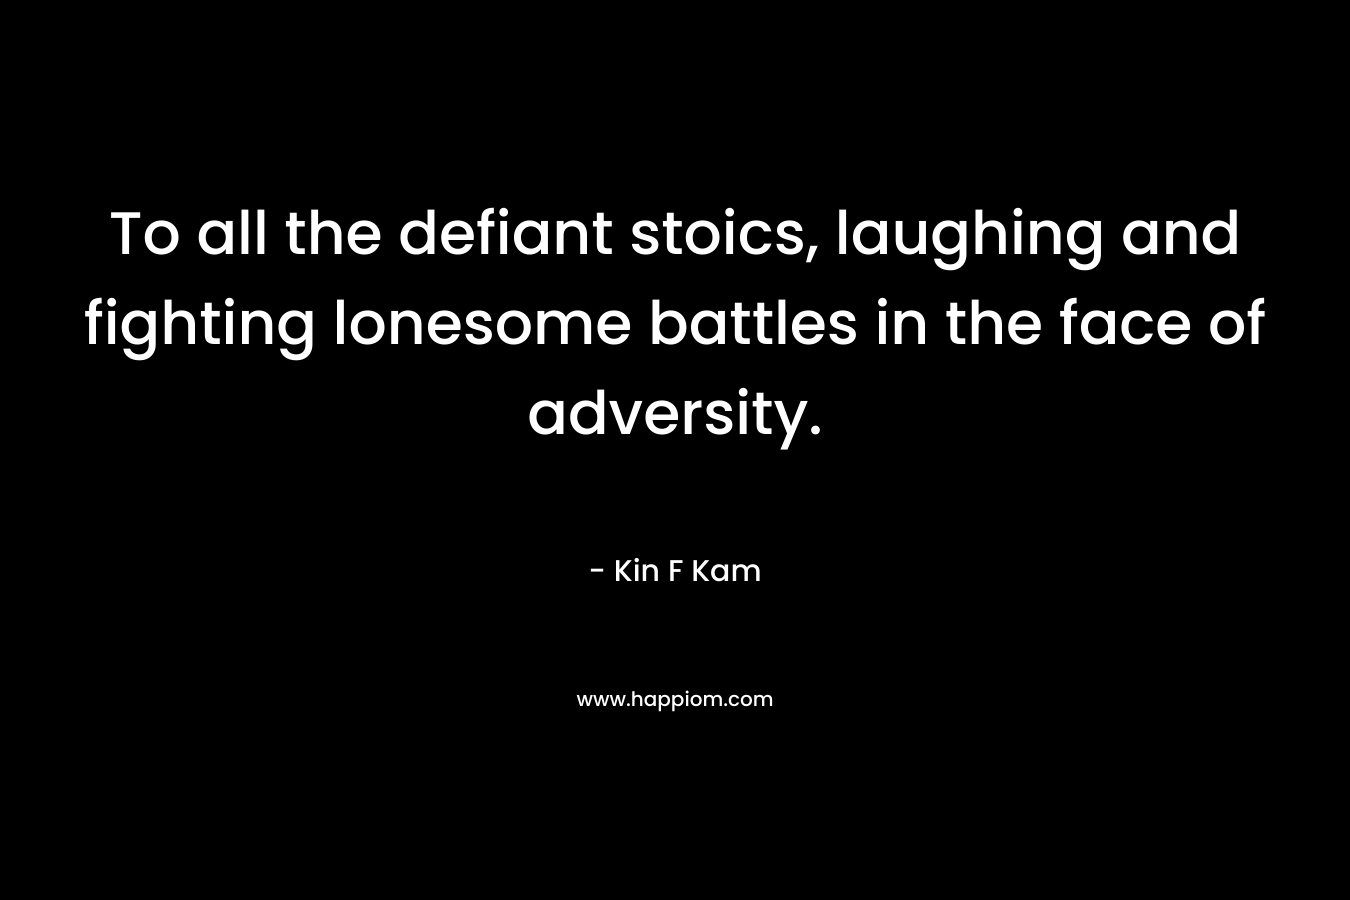 To all the defiant stoics, laughing and fighting lonesome battles in the face of adversity. – Kin F Kam